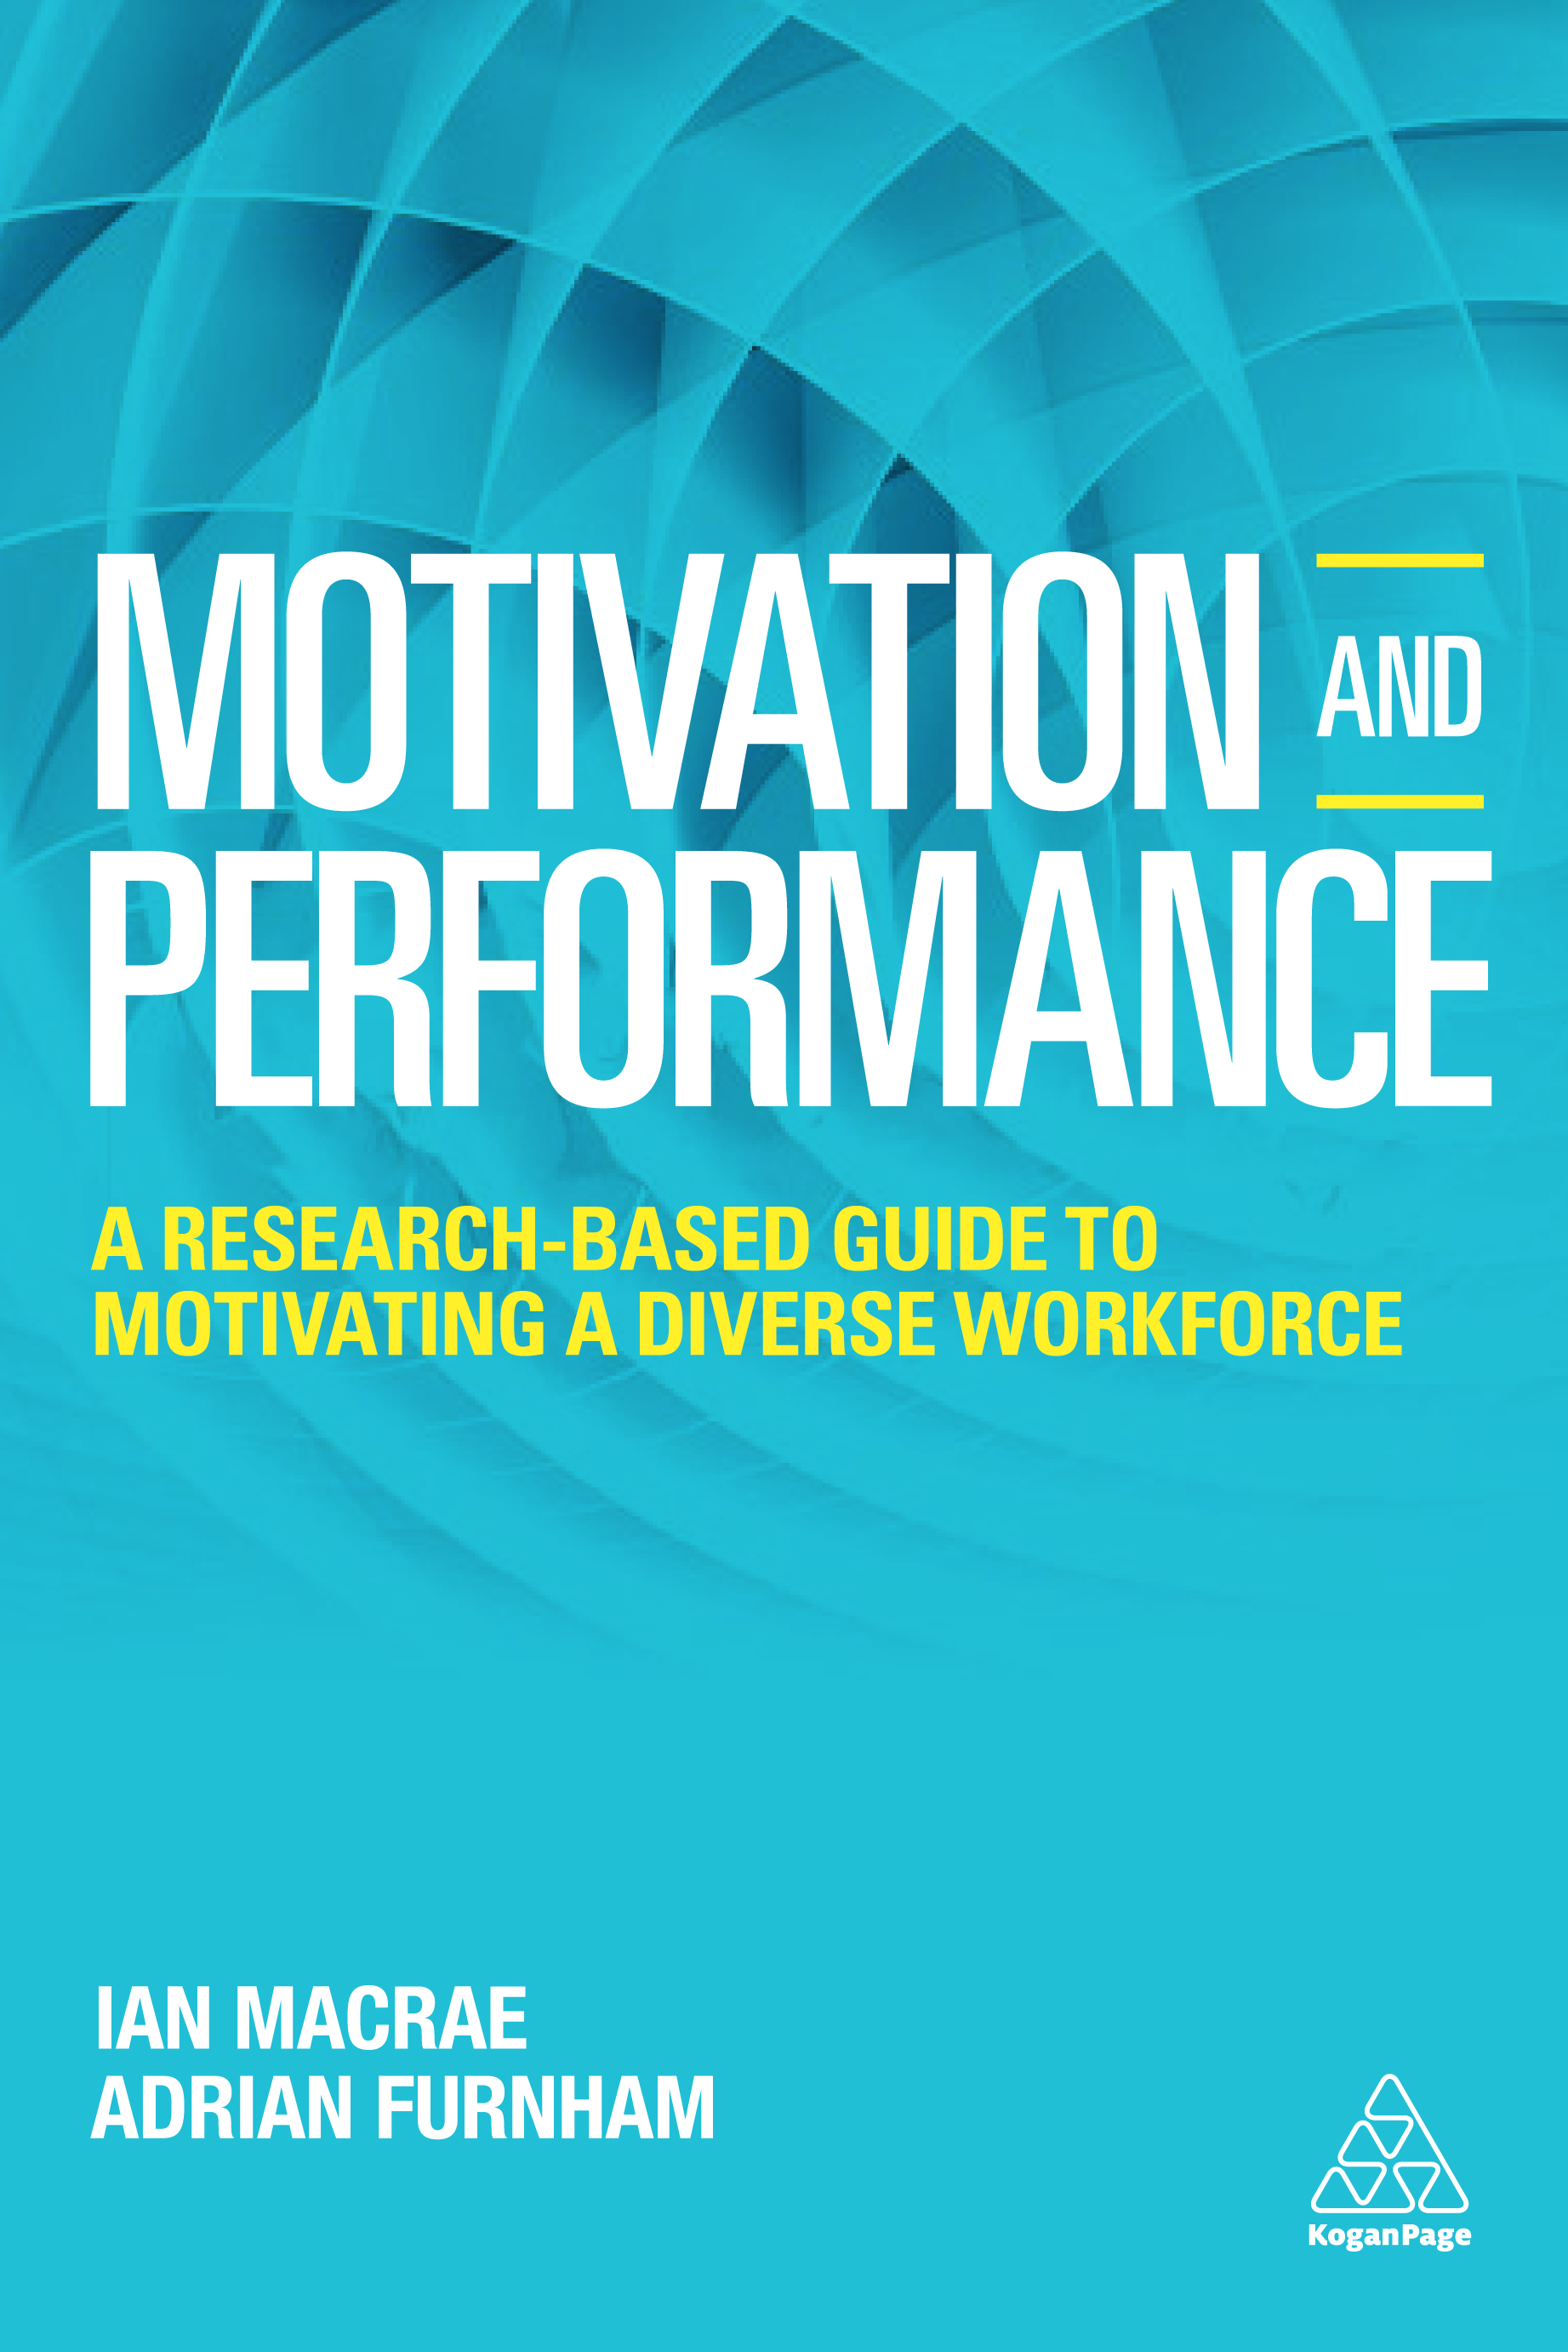 Motivation and Performance MacRae Book Cover